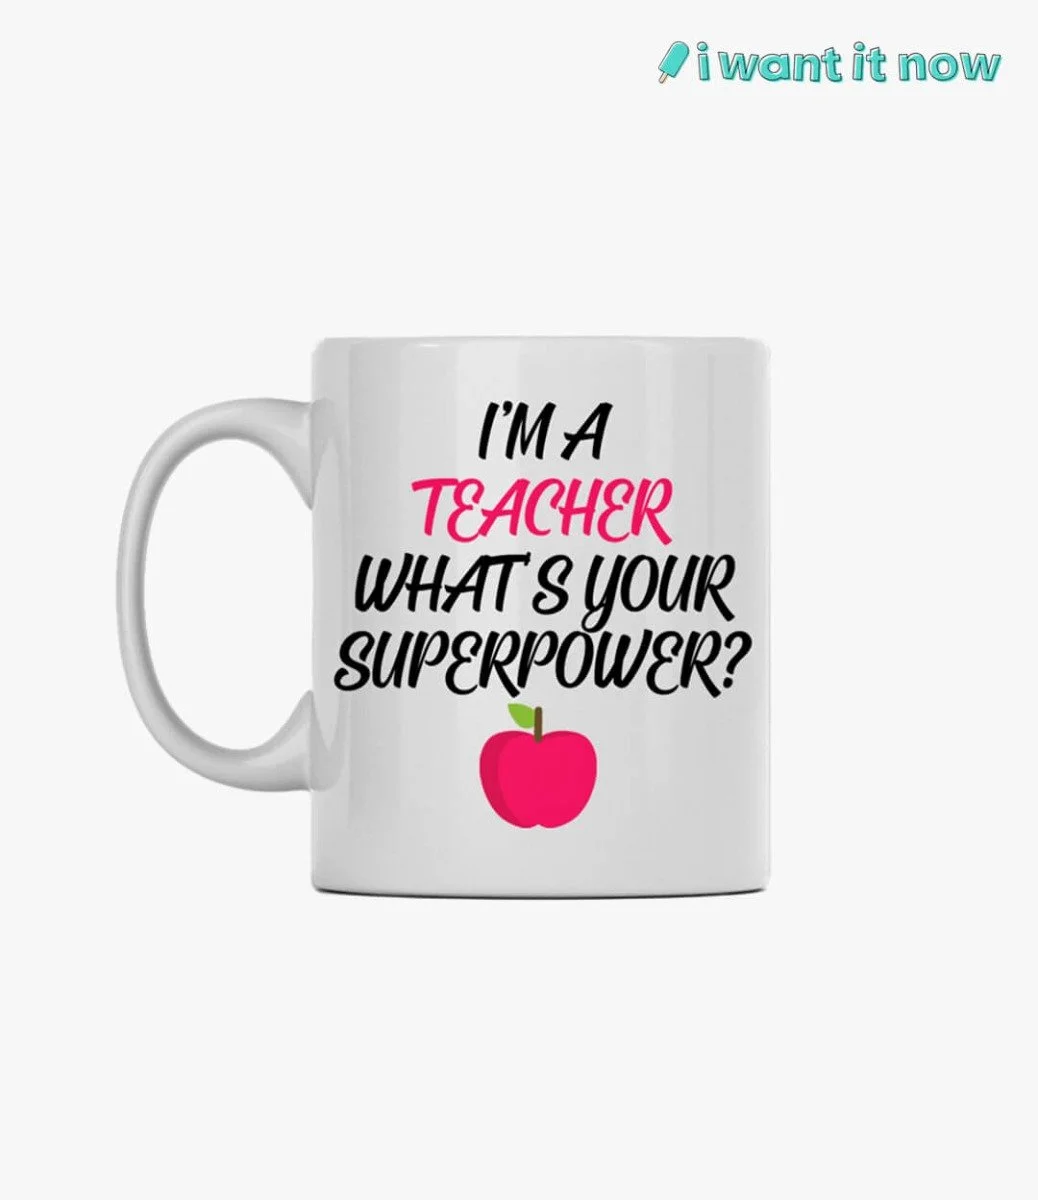 I'm a teacher what's your superpower Mug By I Want It Now